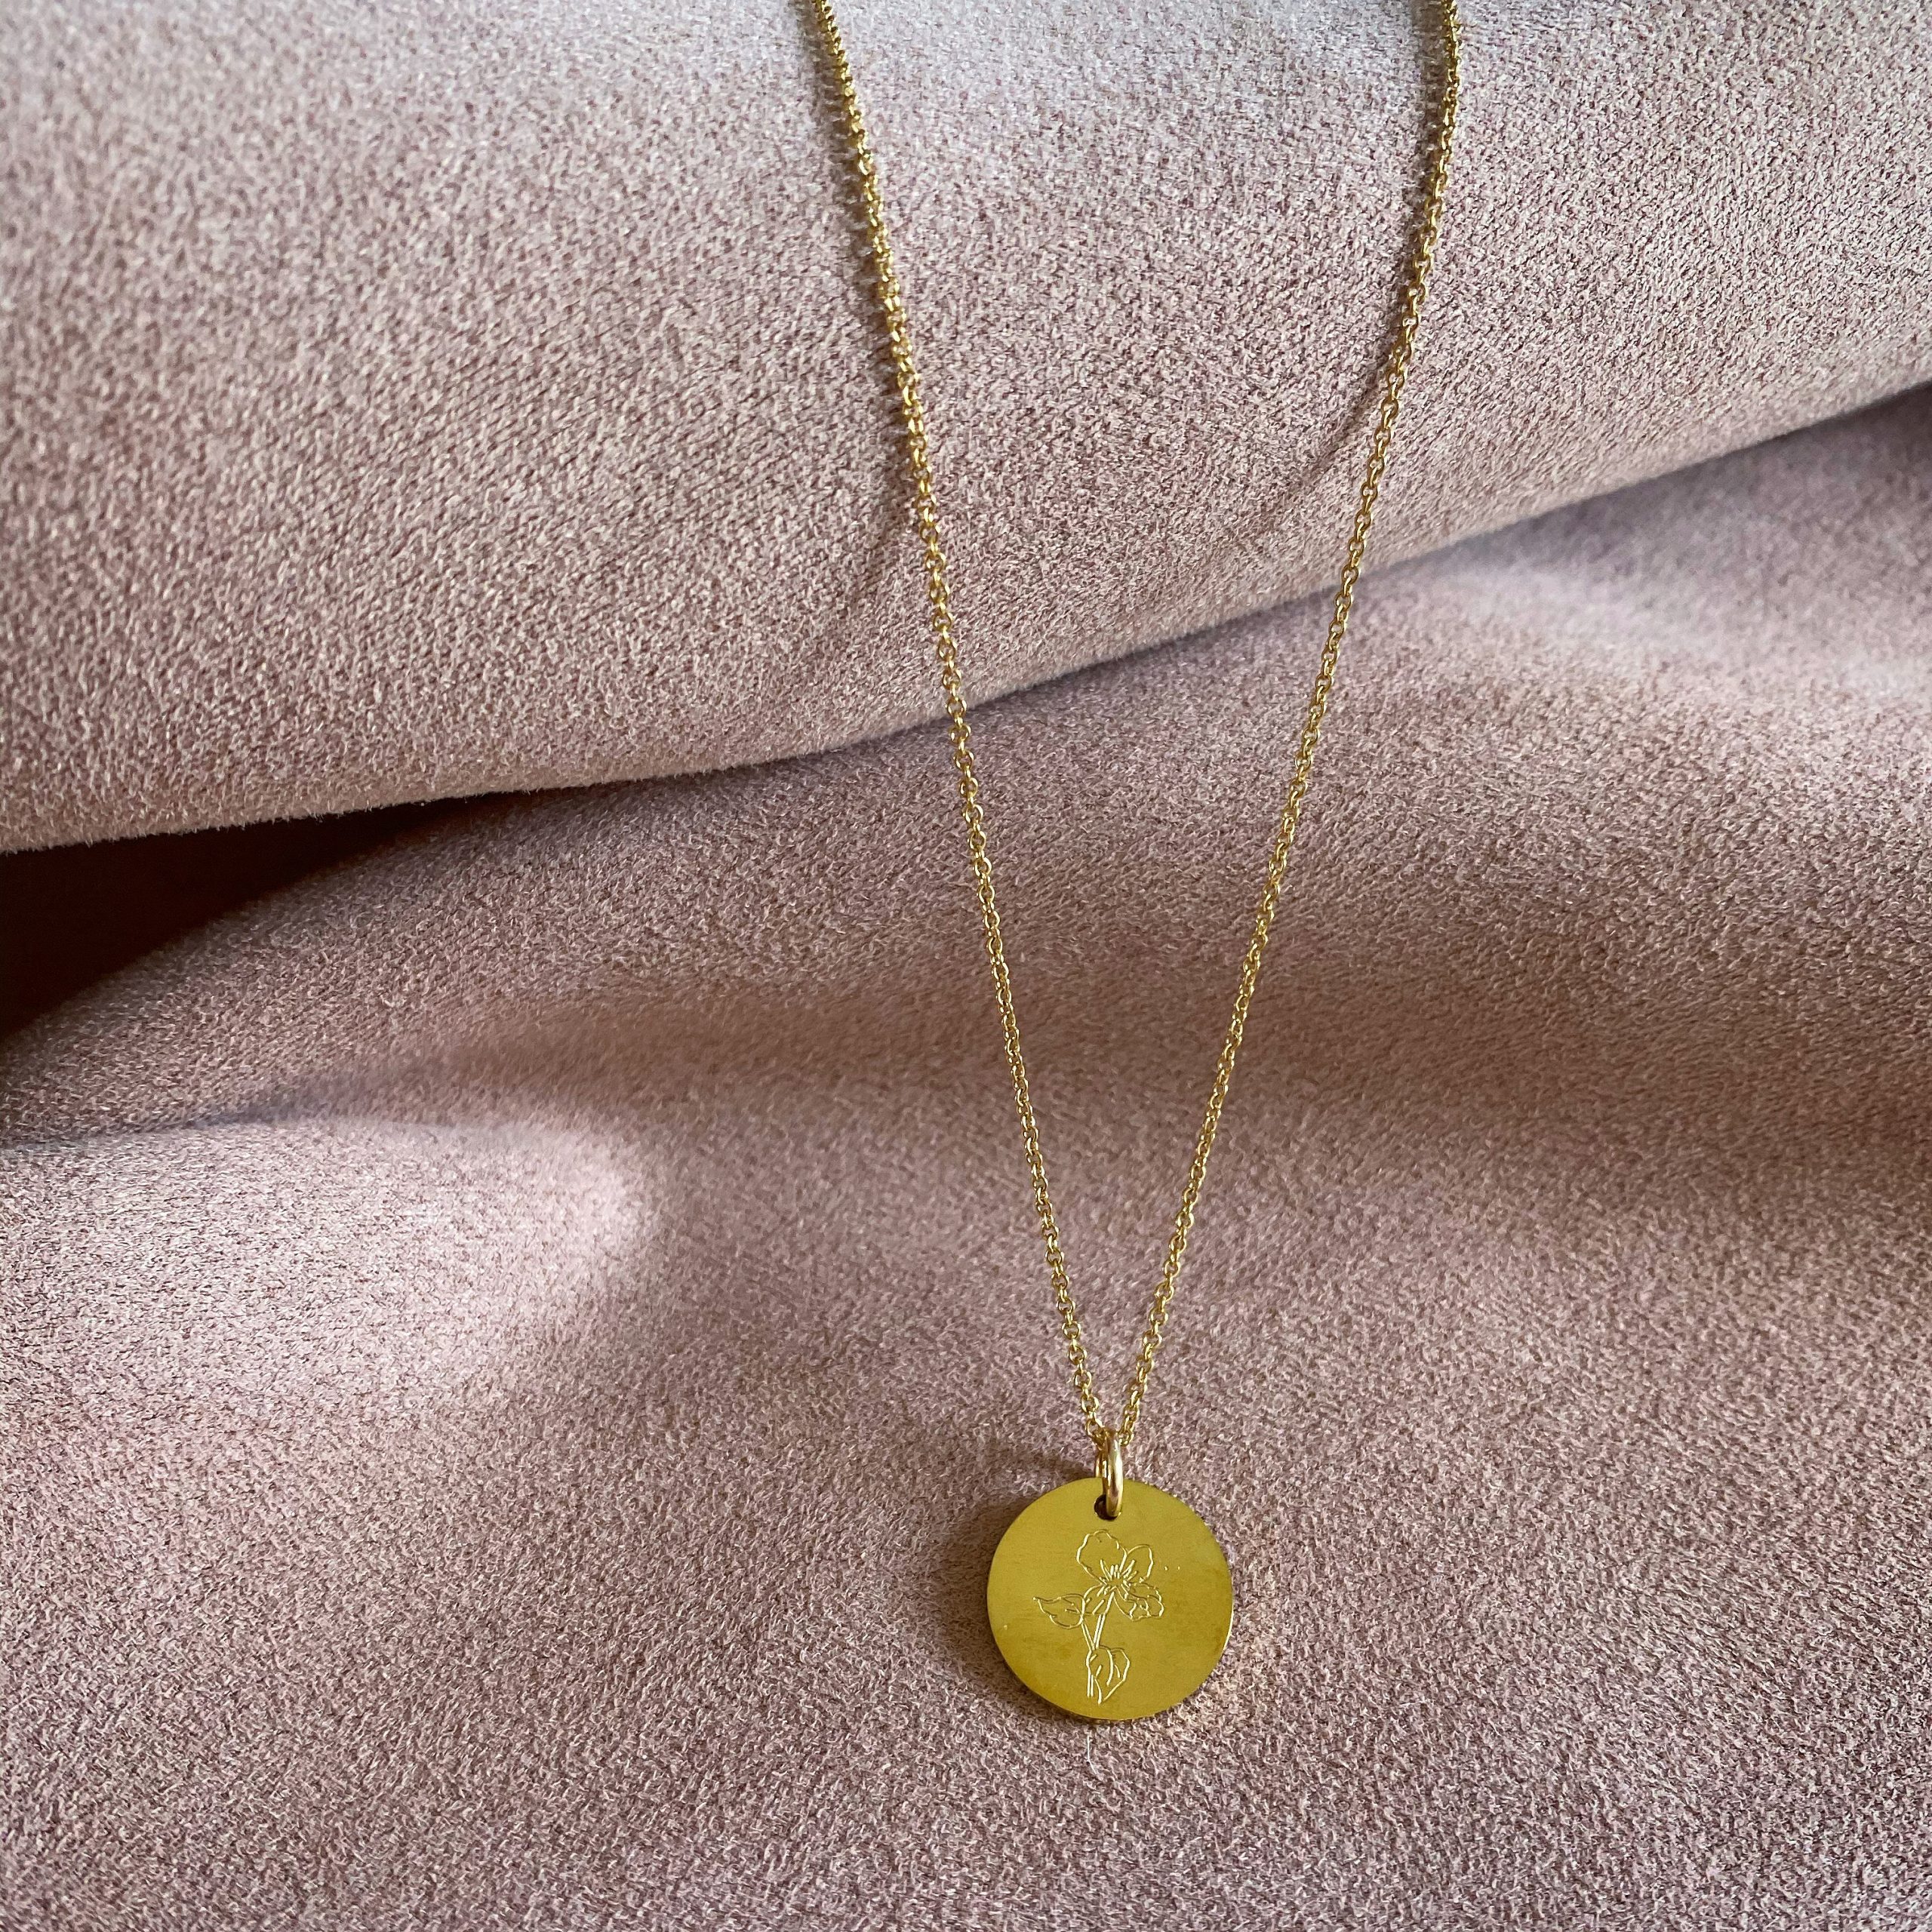 18K Gold Birth Flower Necklace, Flower Necklace, Dainty Necklace,  Minimalist Necklace, Gift for Her, Cute Necklace, Custom Everyday Necklace  - Etsy